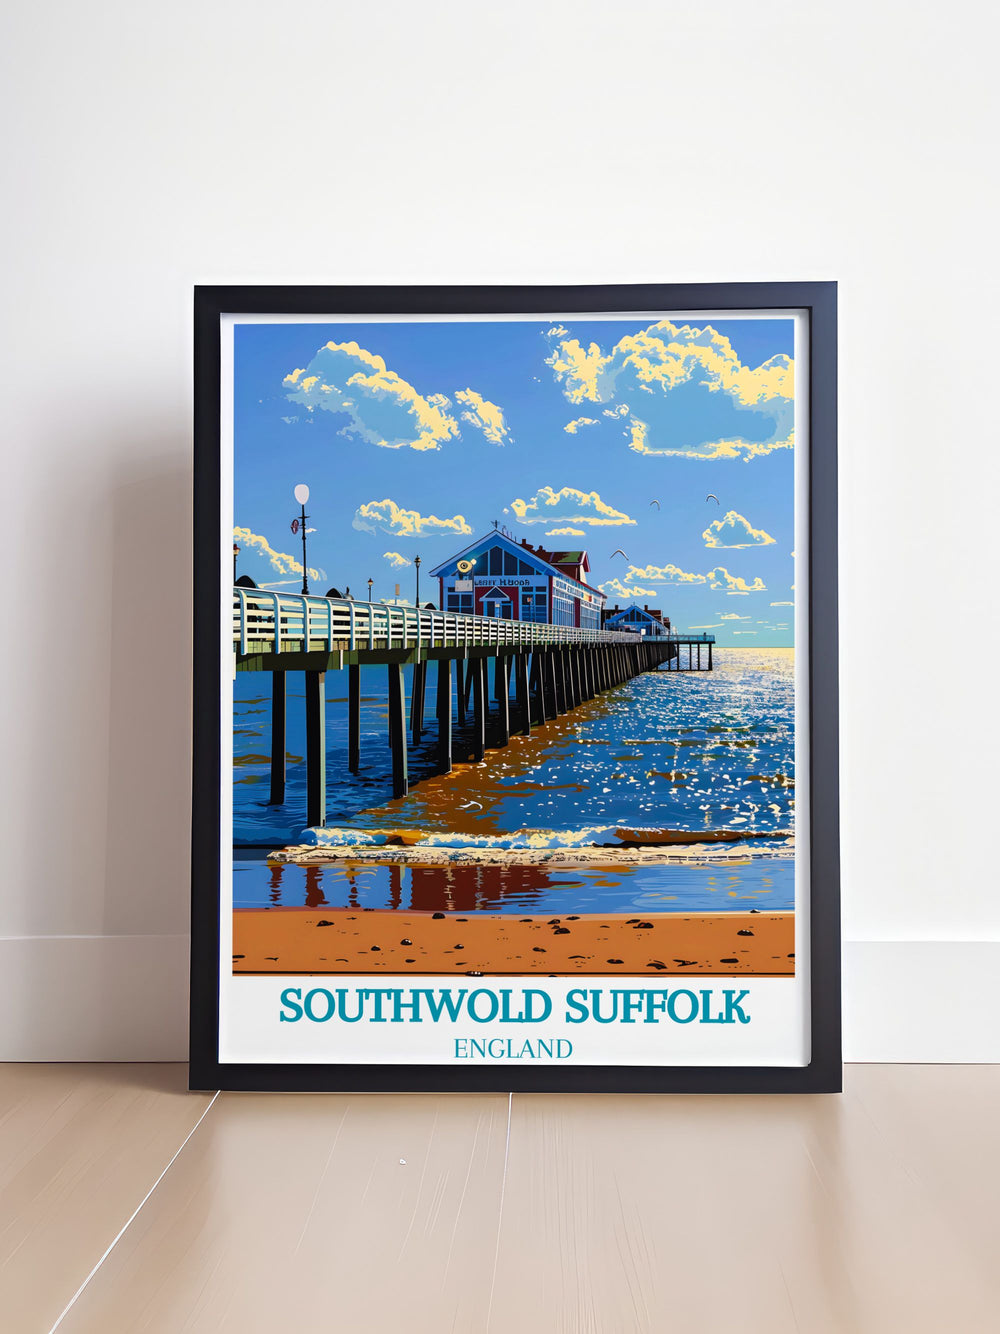 Immerse yourself in the scenic wonders of Southwold with this travel poster, featuring the bustling pier and the vibrant coastal landscape.